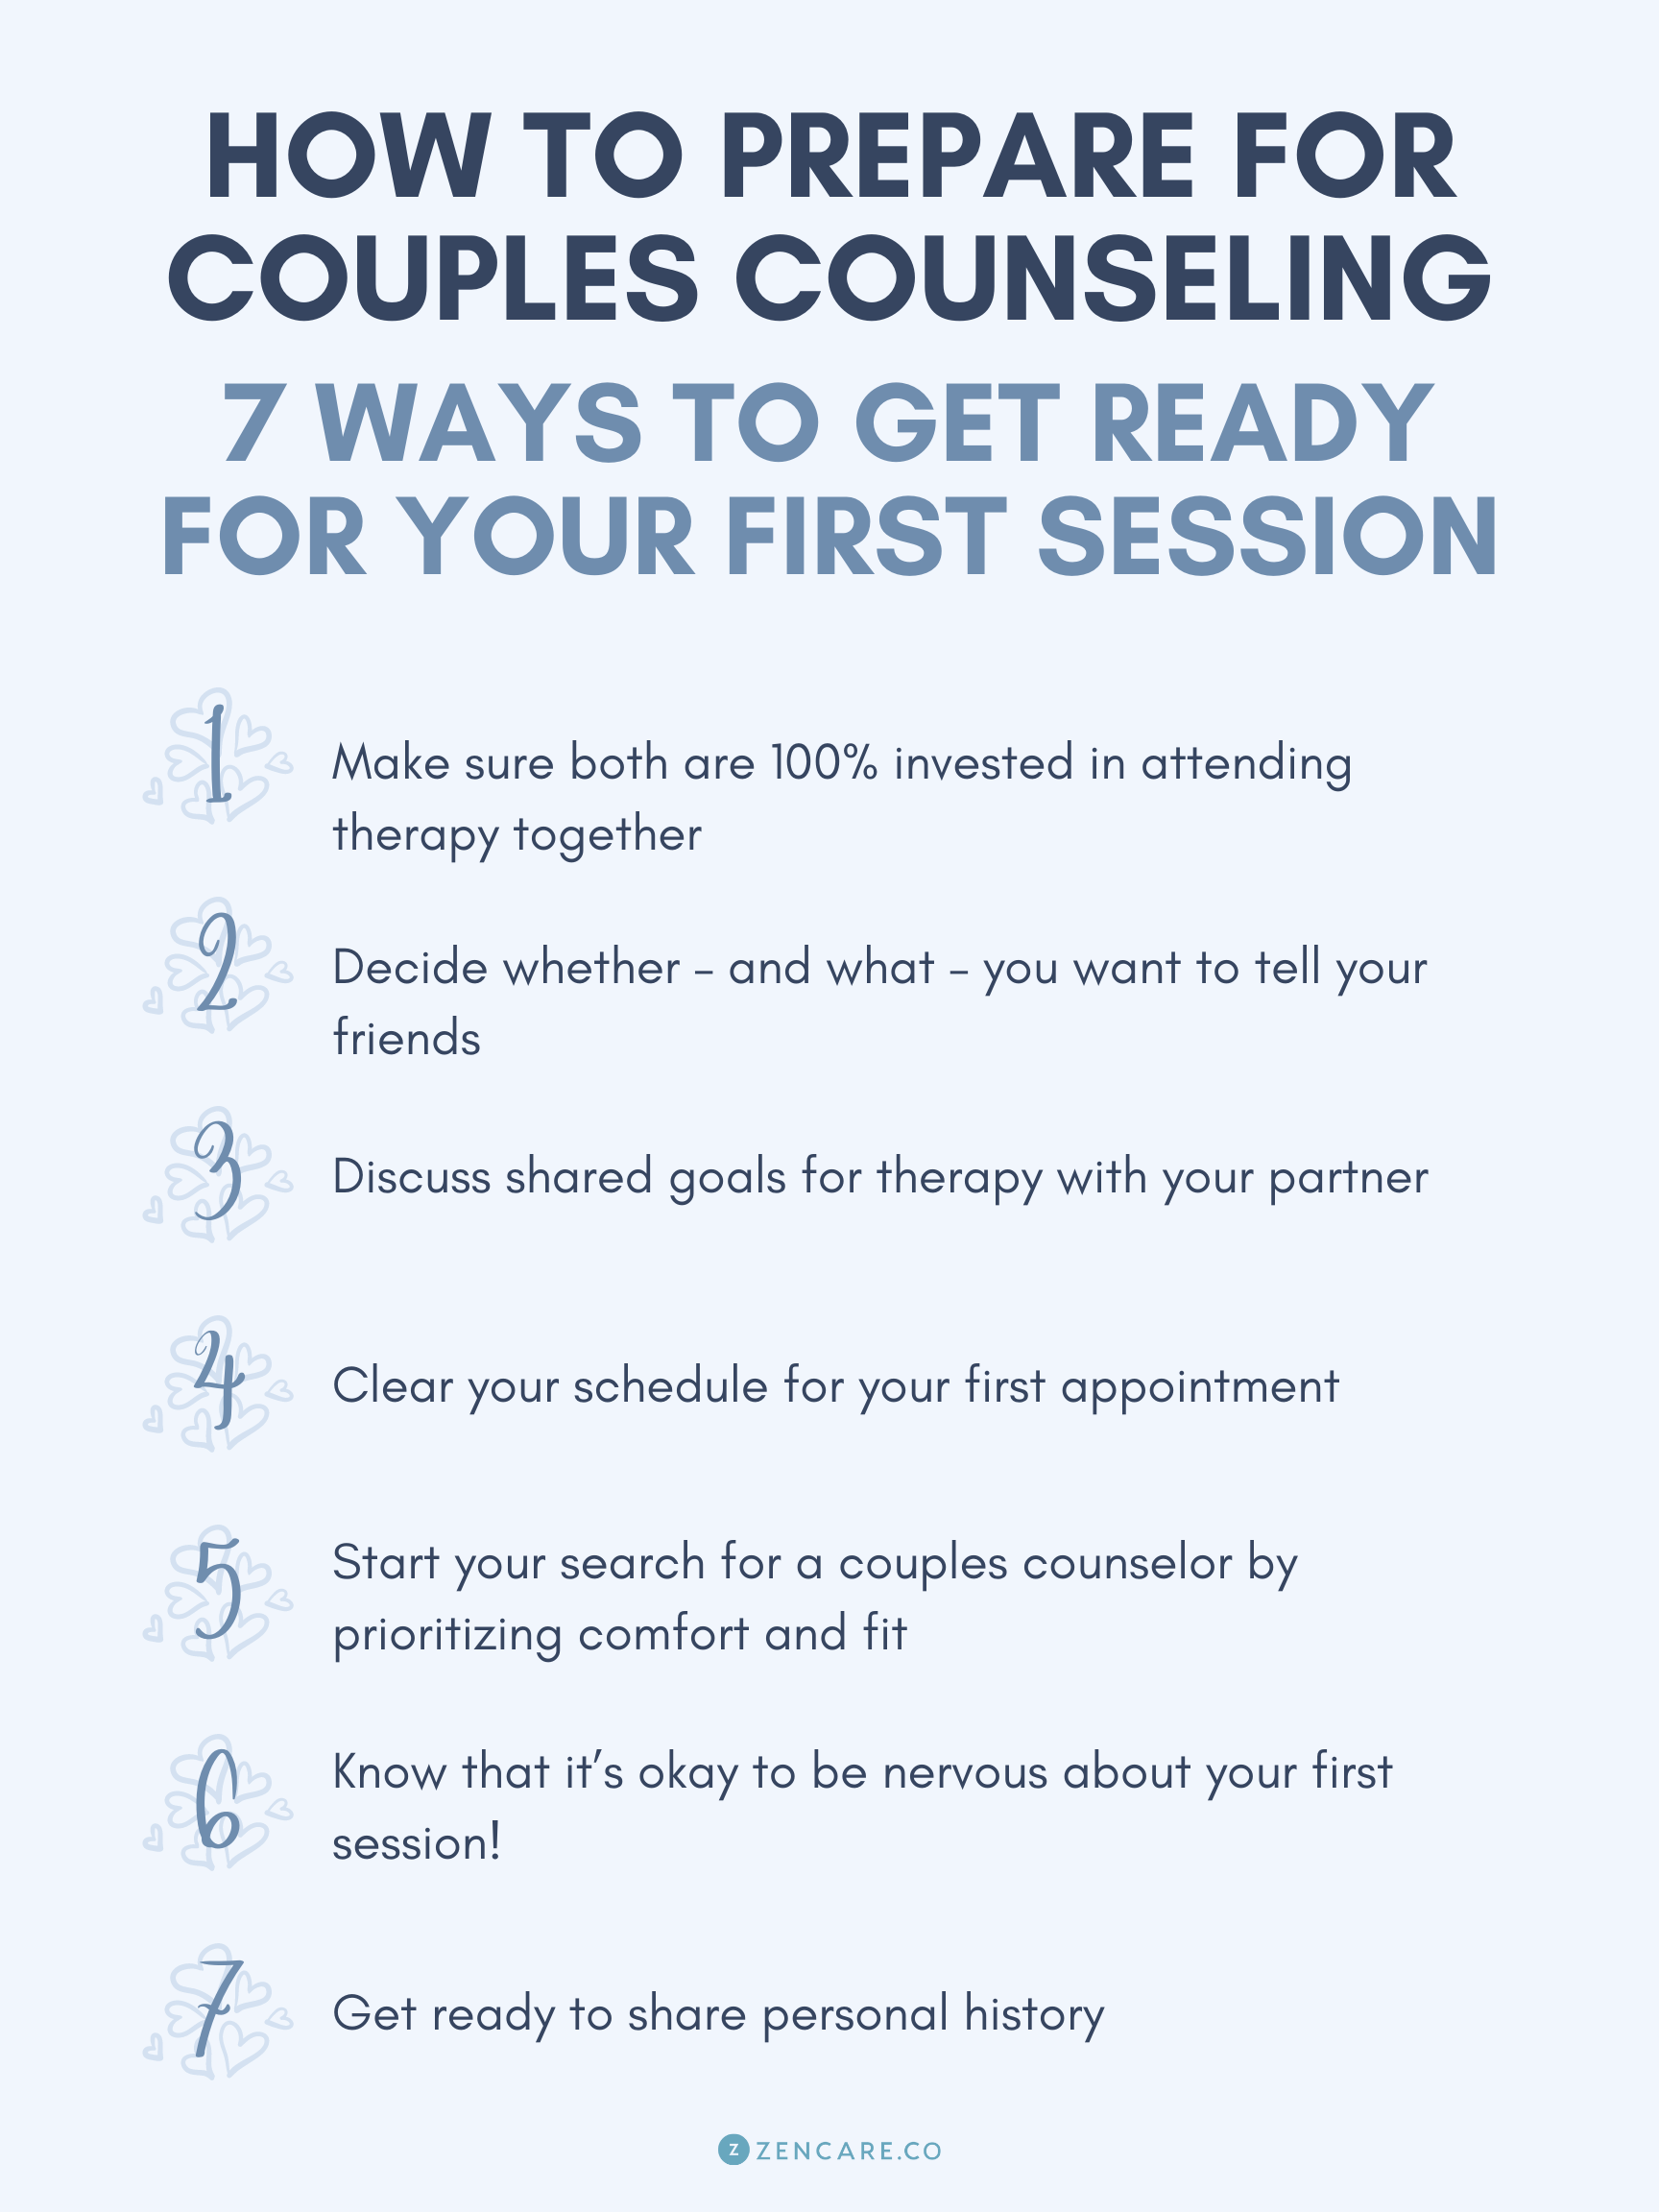 How To Prepare For Couples Counseling 7 Ways To Get Ready For Your First Session